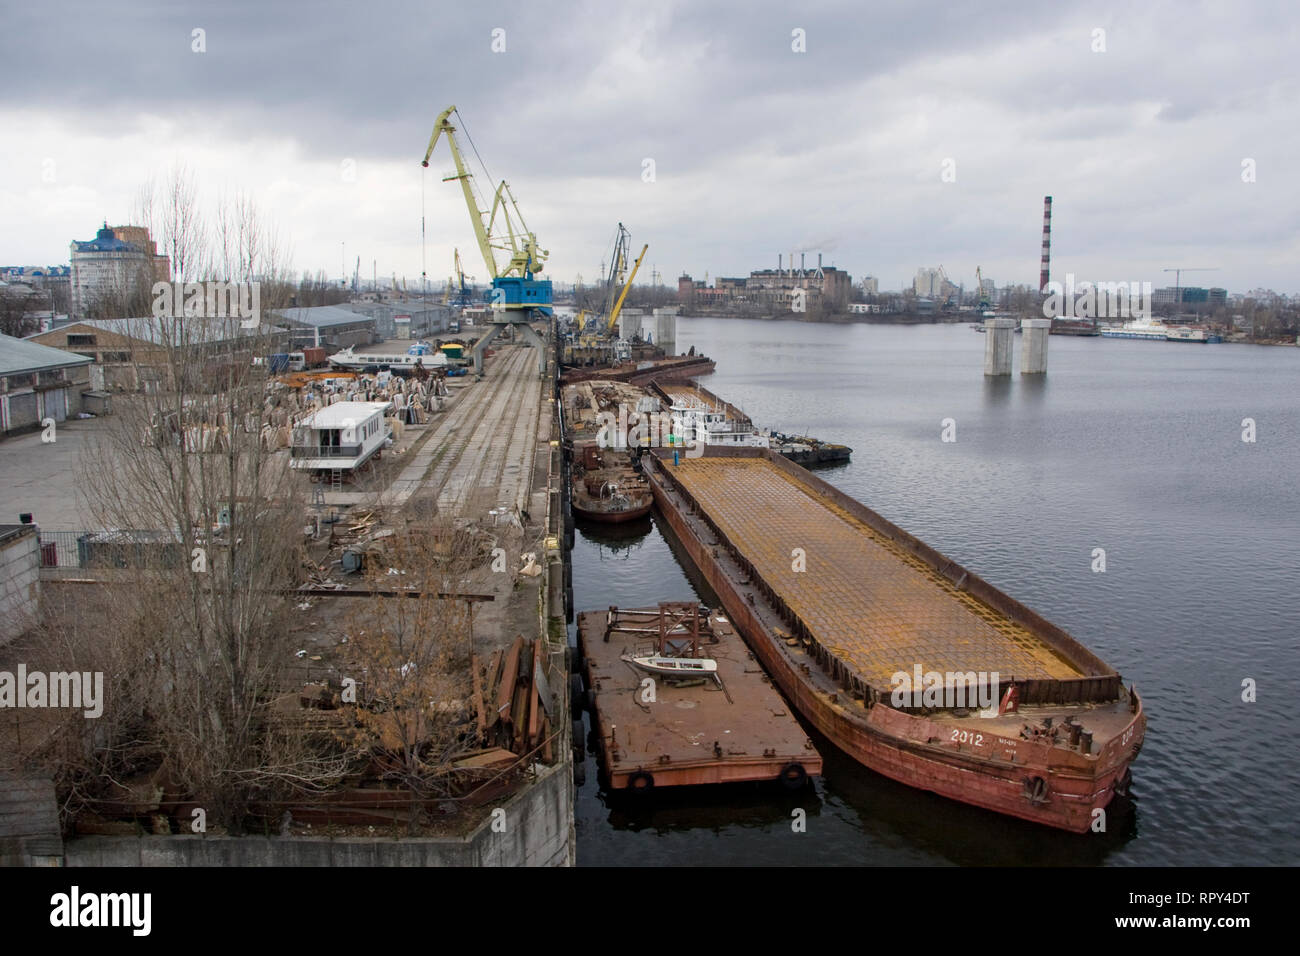 A walk on a cloudy day along the embankment and industrial places of the city along the river, barges, bridges, graffiti, cranes and ships. Stock Photo